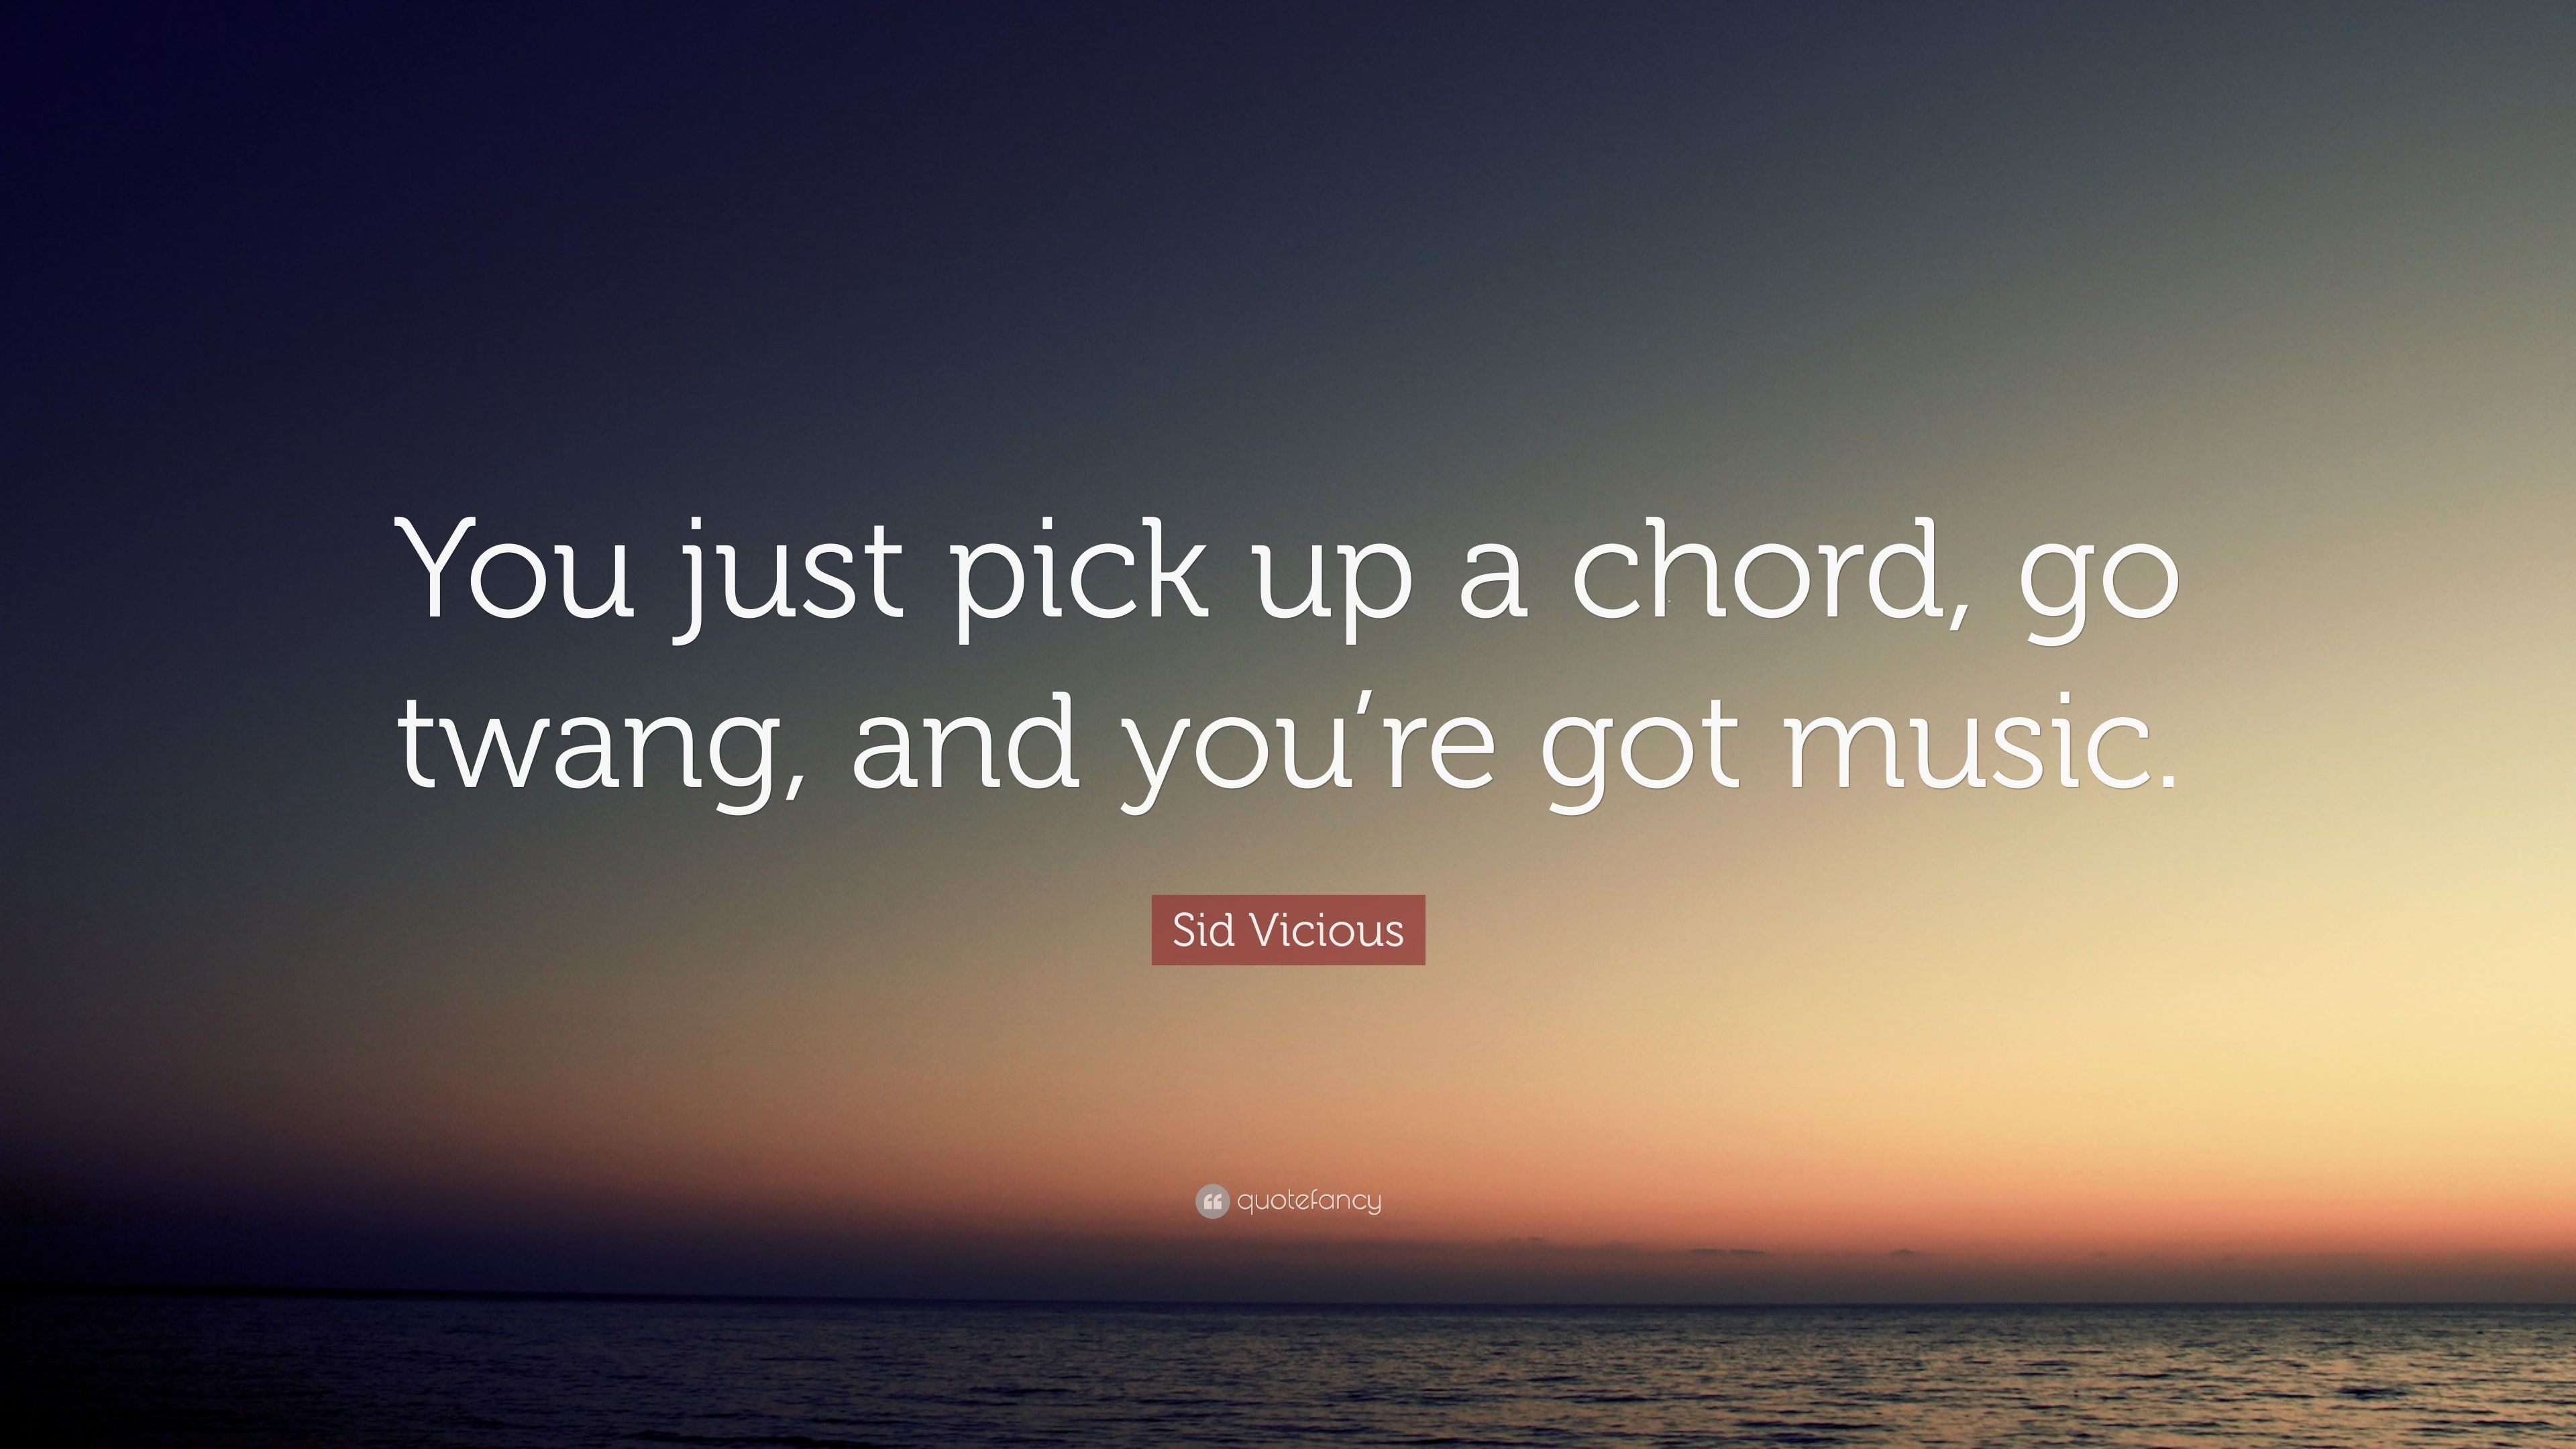 3840x2160 Sid Vicious Quote: “You just pick up a chord, go twang, and